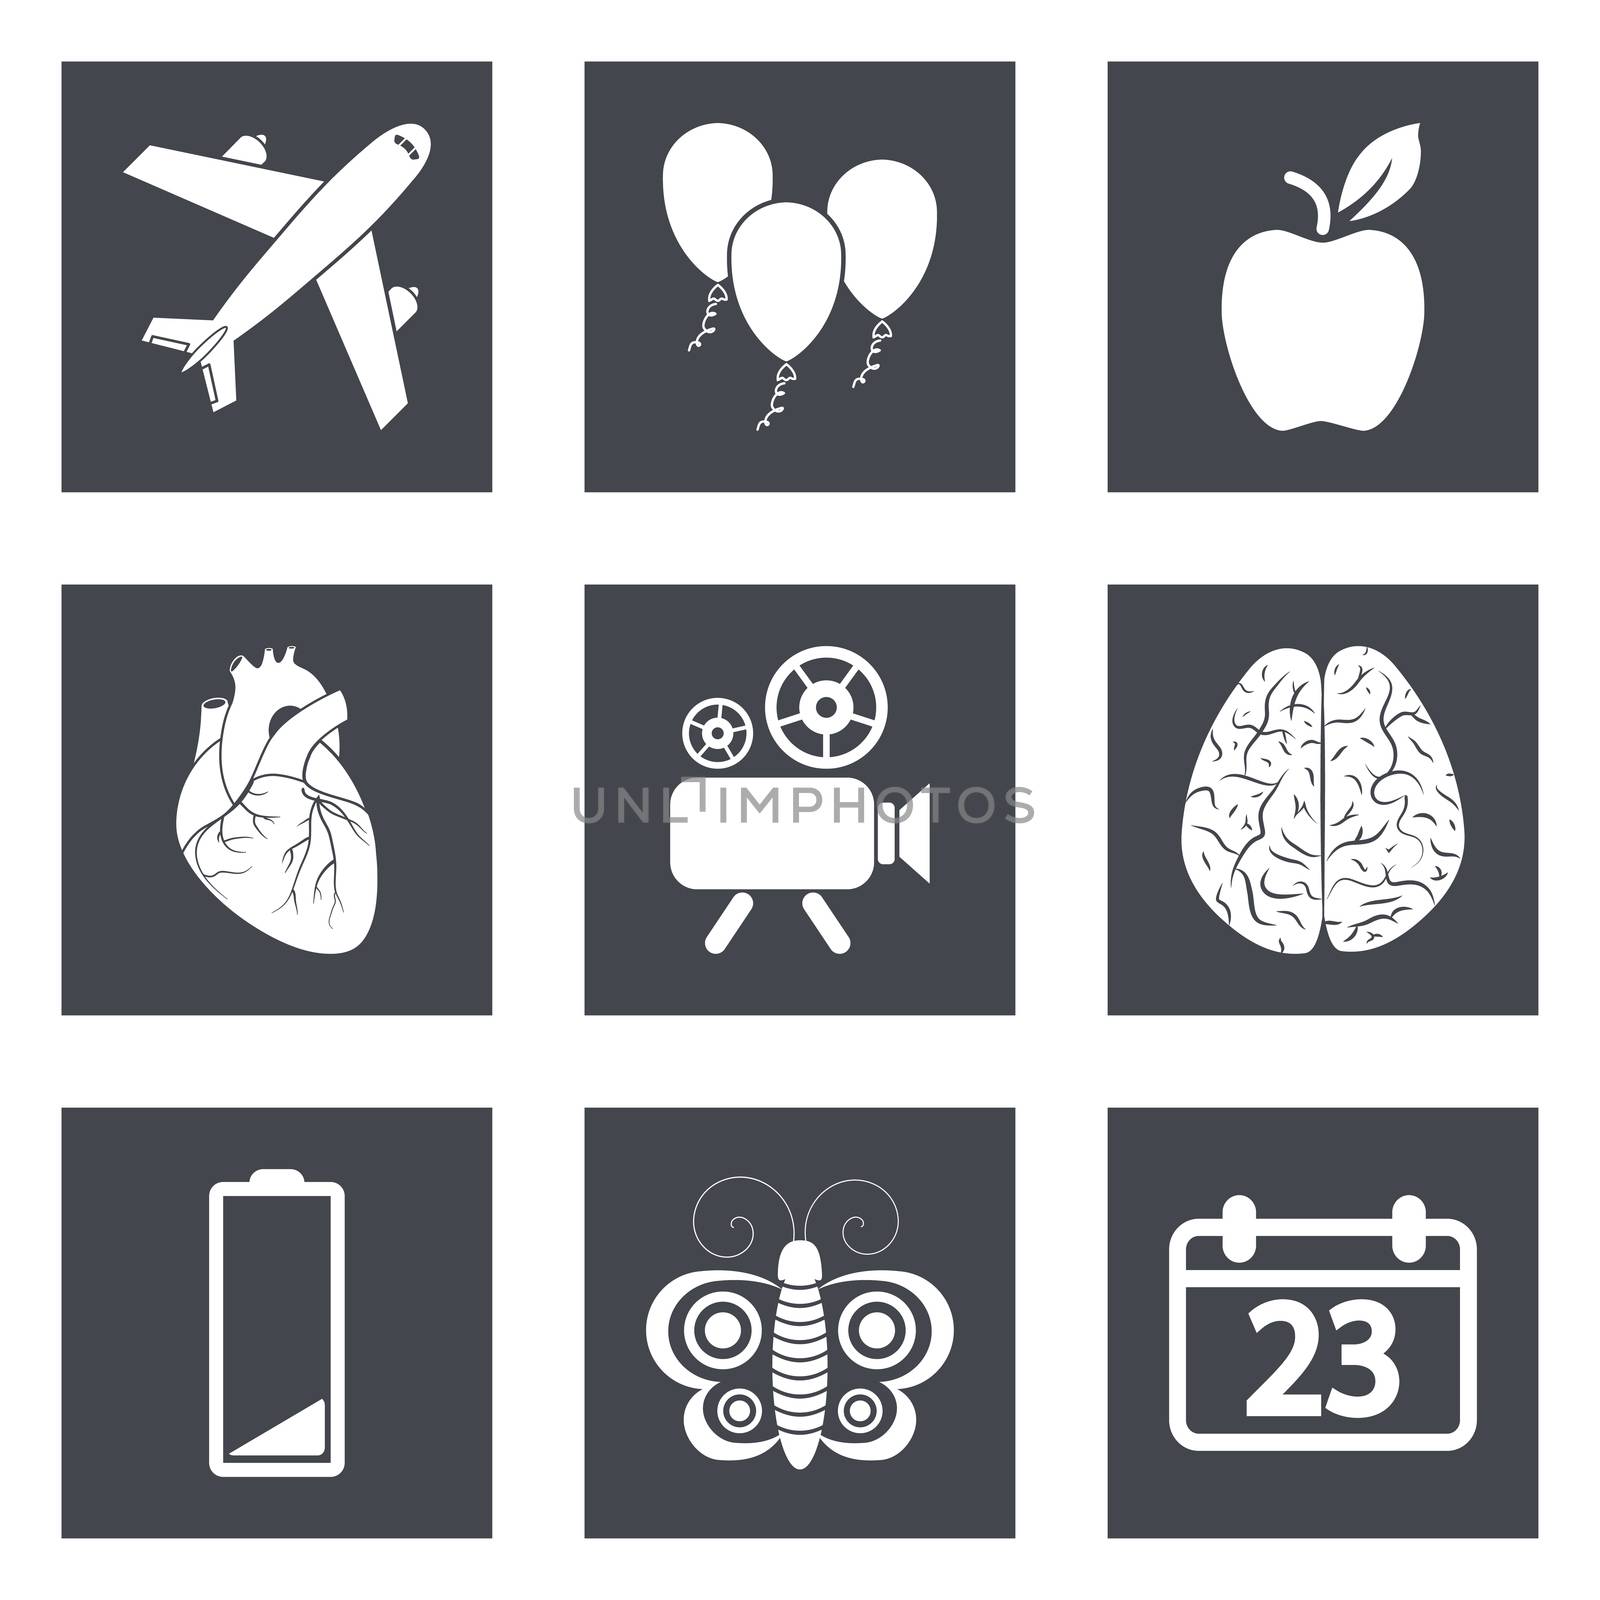 Icons for Web Design and Mobile Applications set 2 by smoki